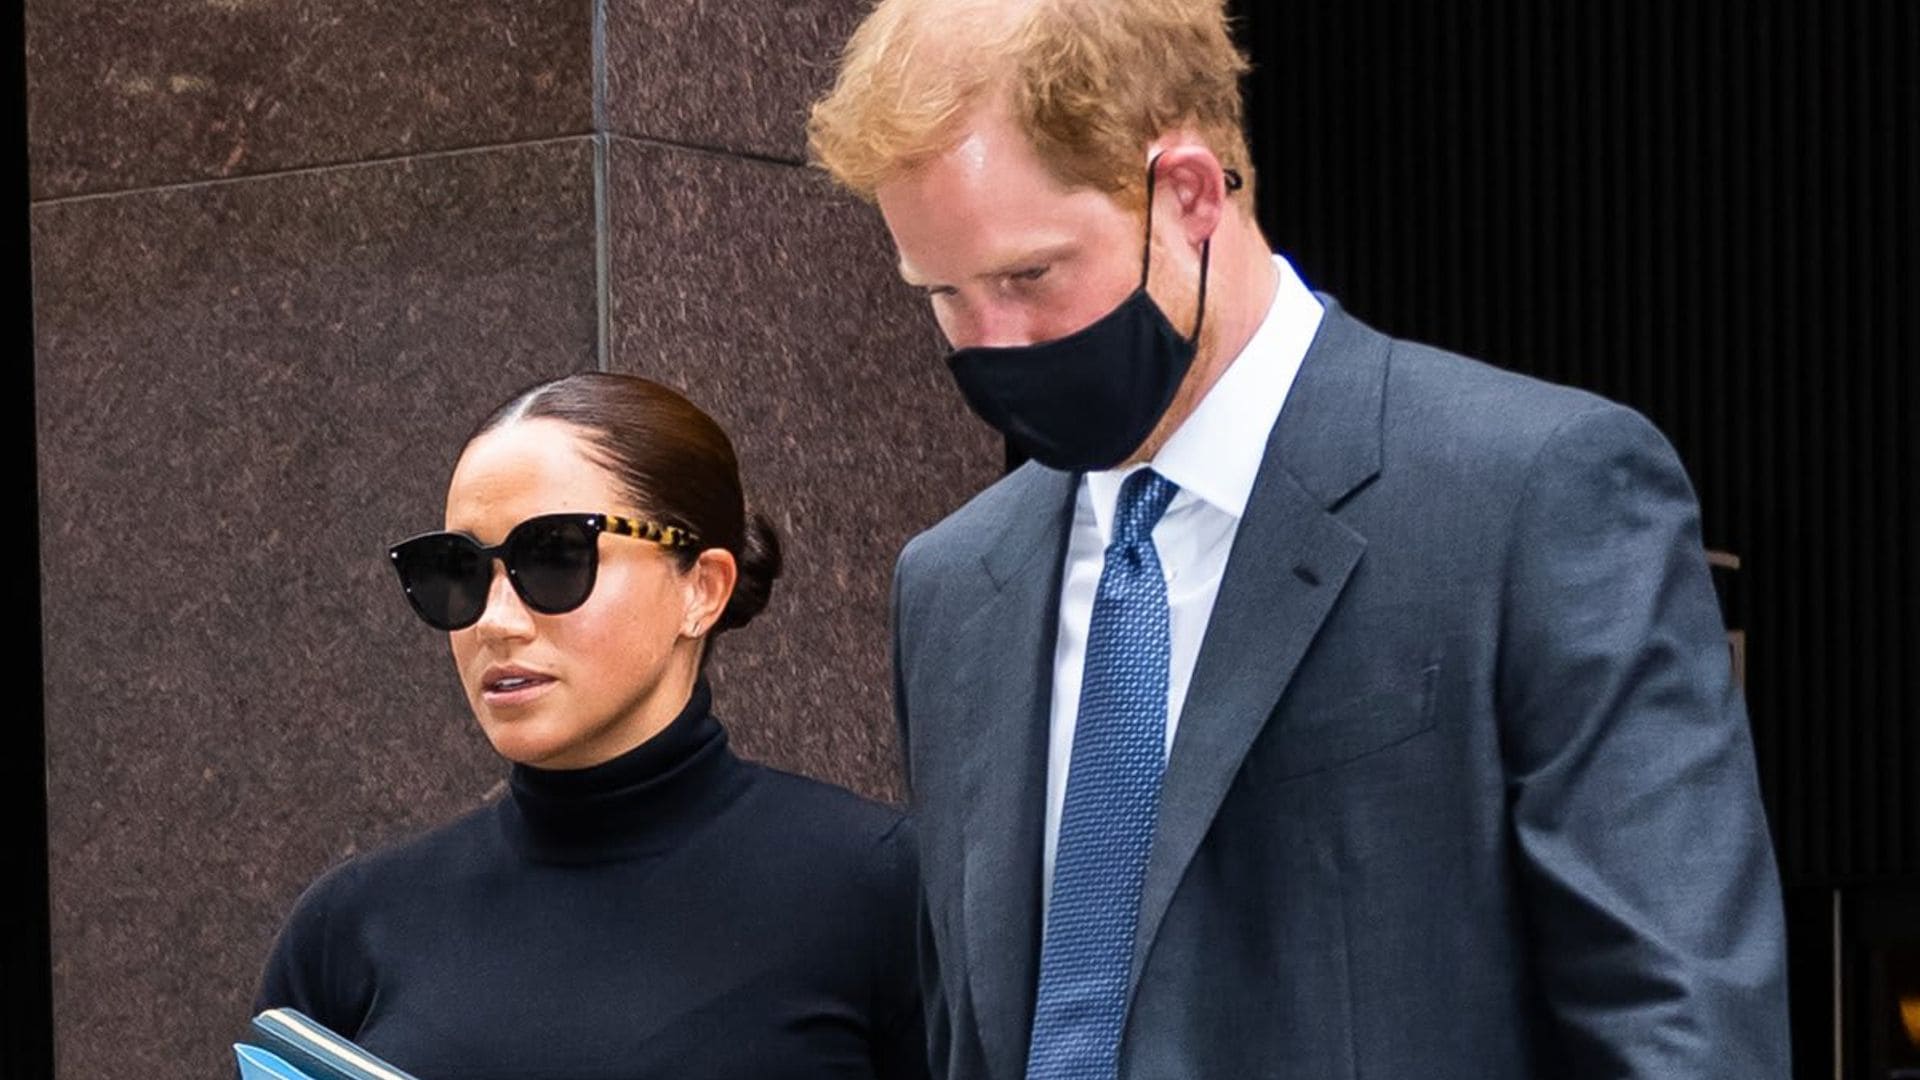 prince Harry stepped out in NYC with an adorable tribute to son Archie